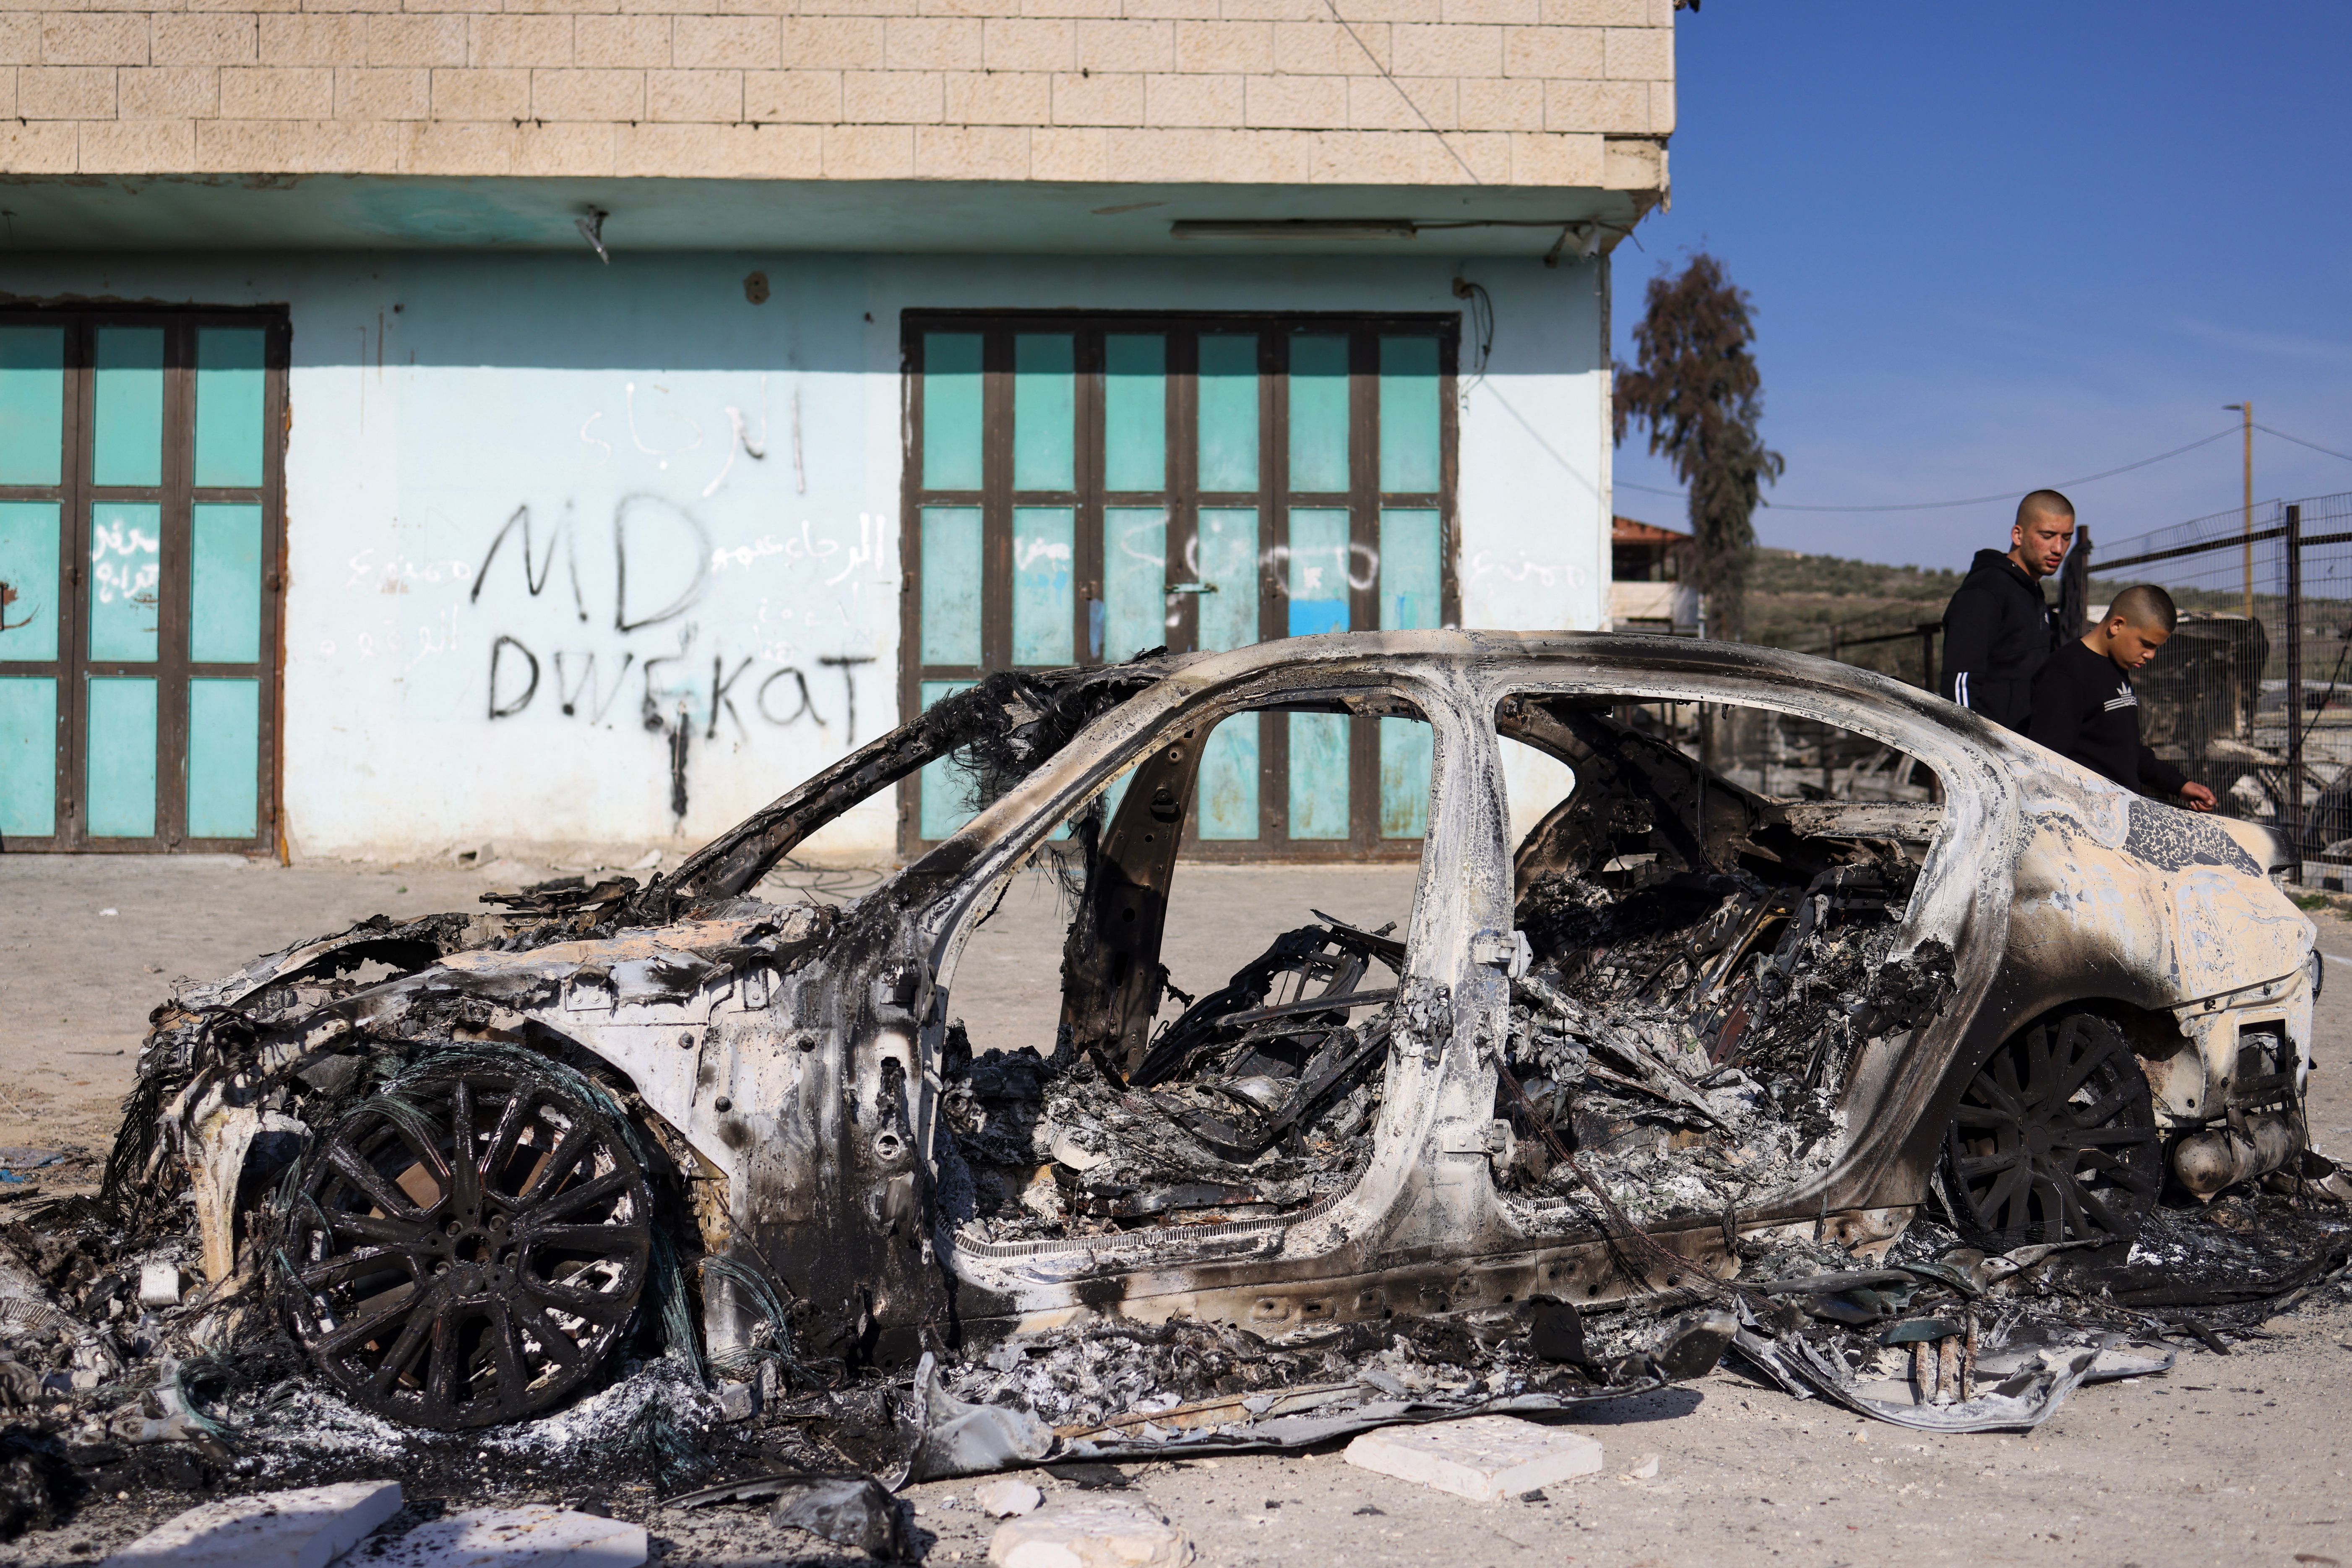 A burned-out four-door car beside a graffitied building.